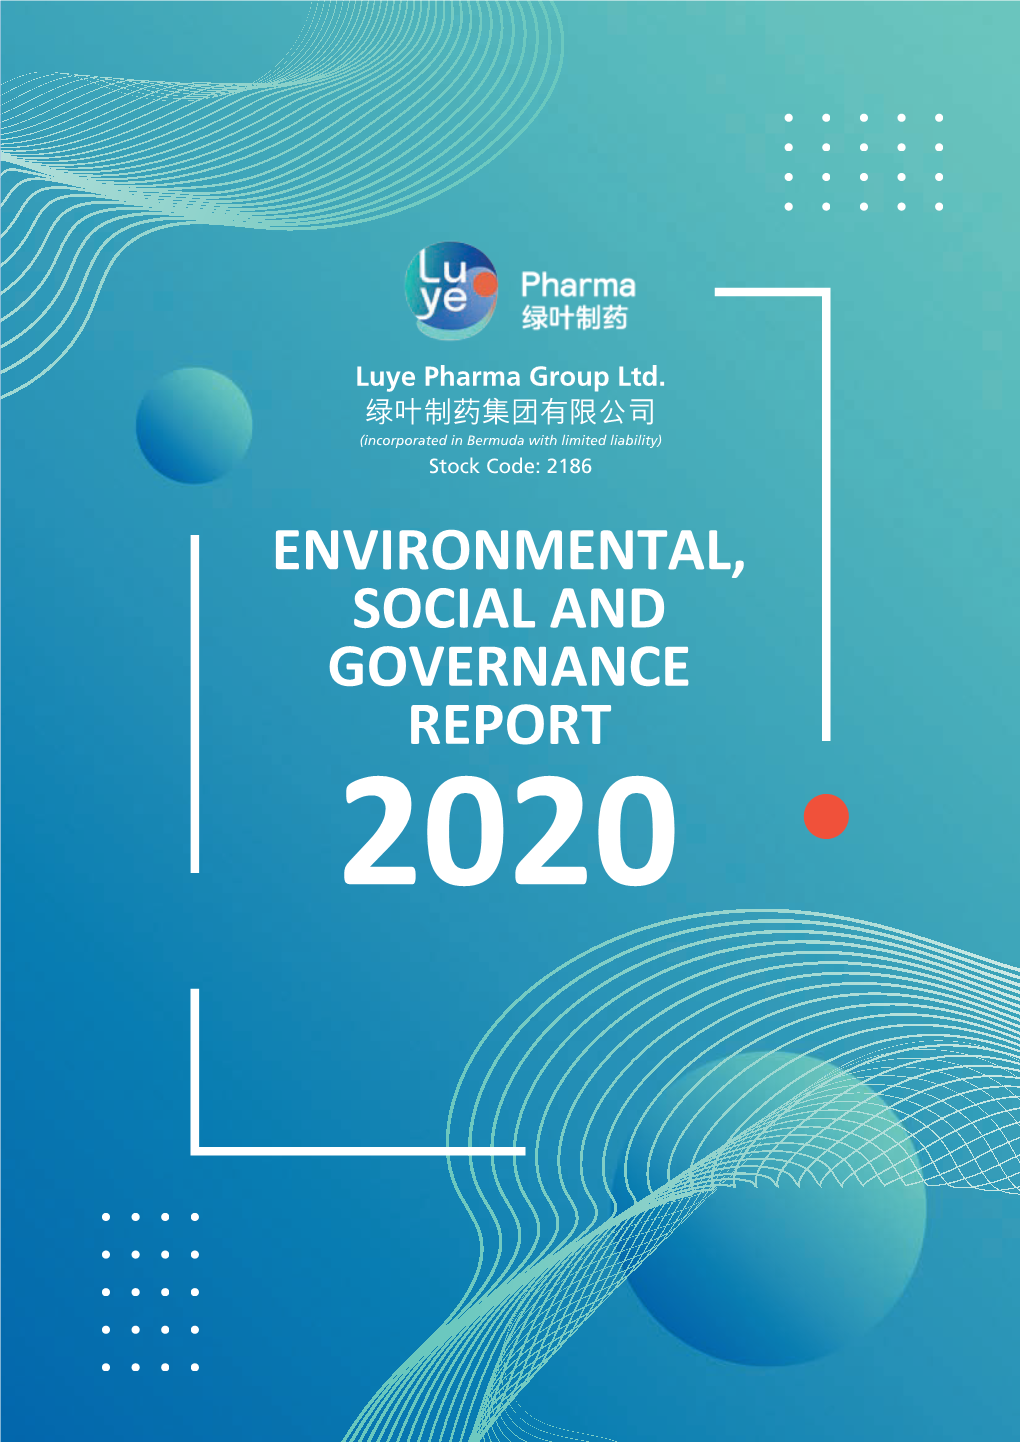 07-22 2021 Environmental, Social and Governance Report 2020 Publisher